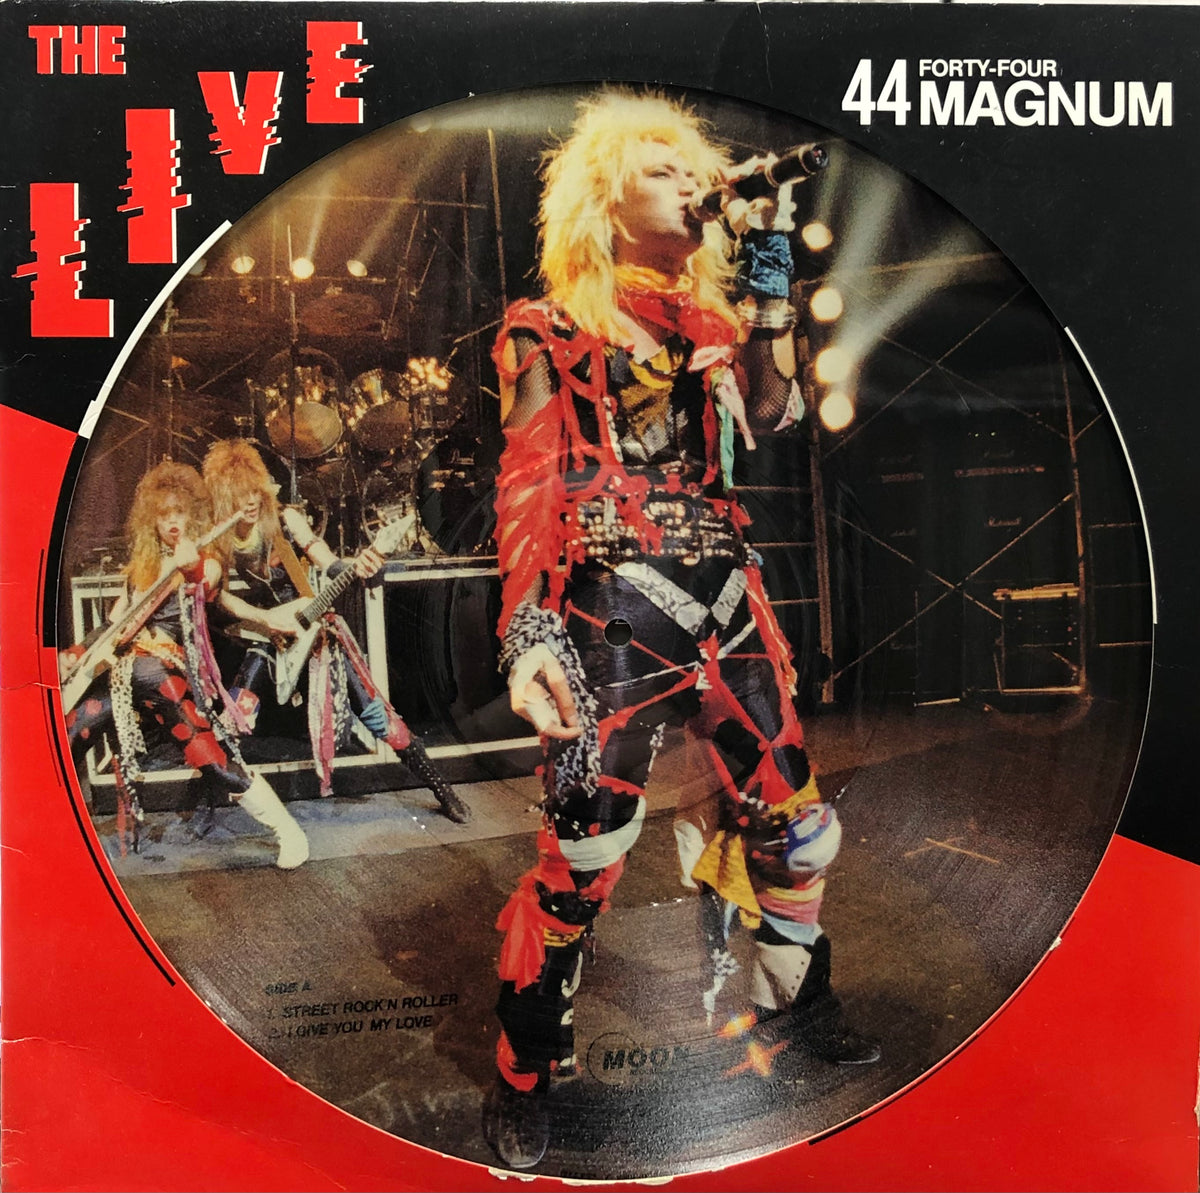 44MAGNUM / The Live (Picture Vinyl) (MOON-23002, 12inch 